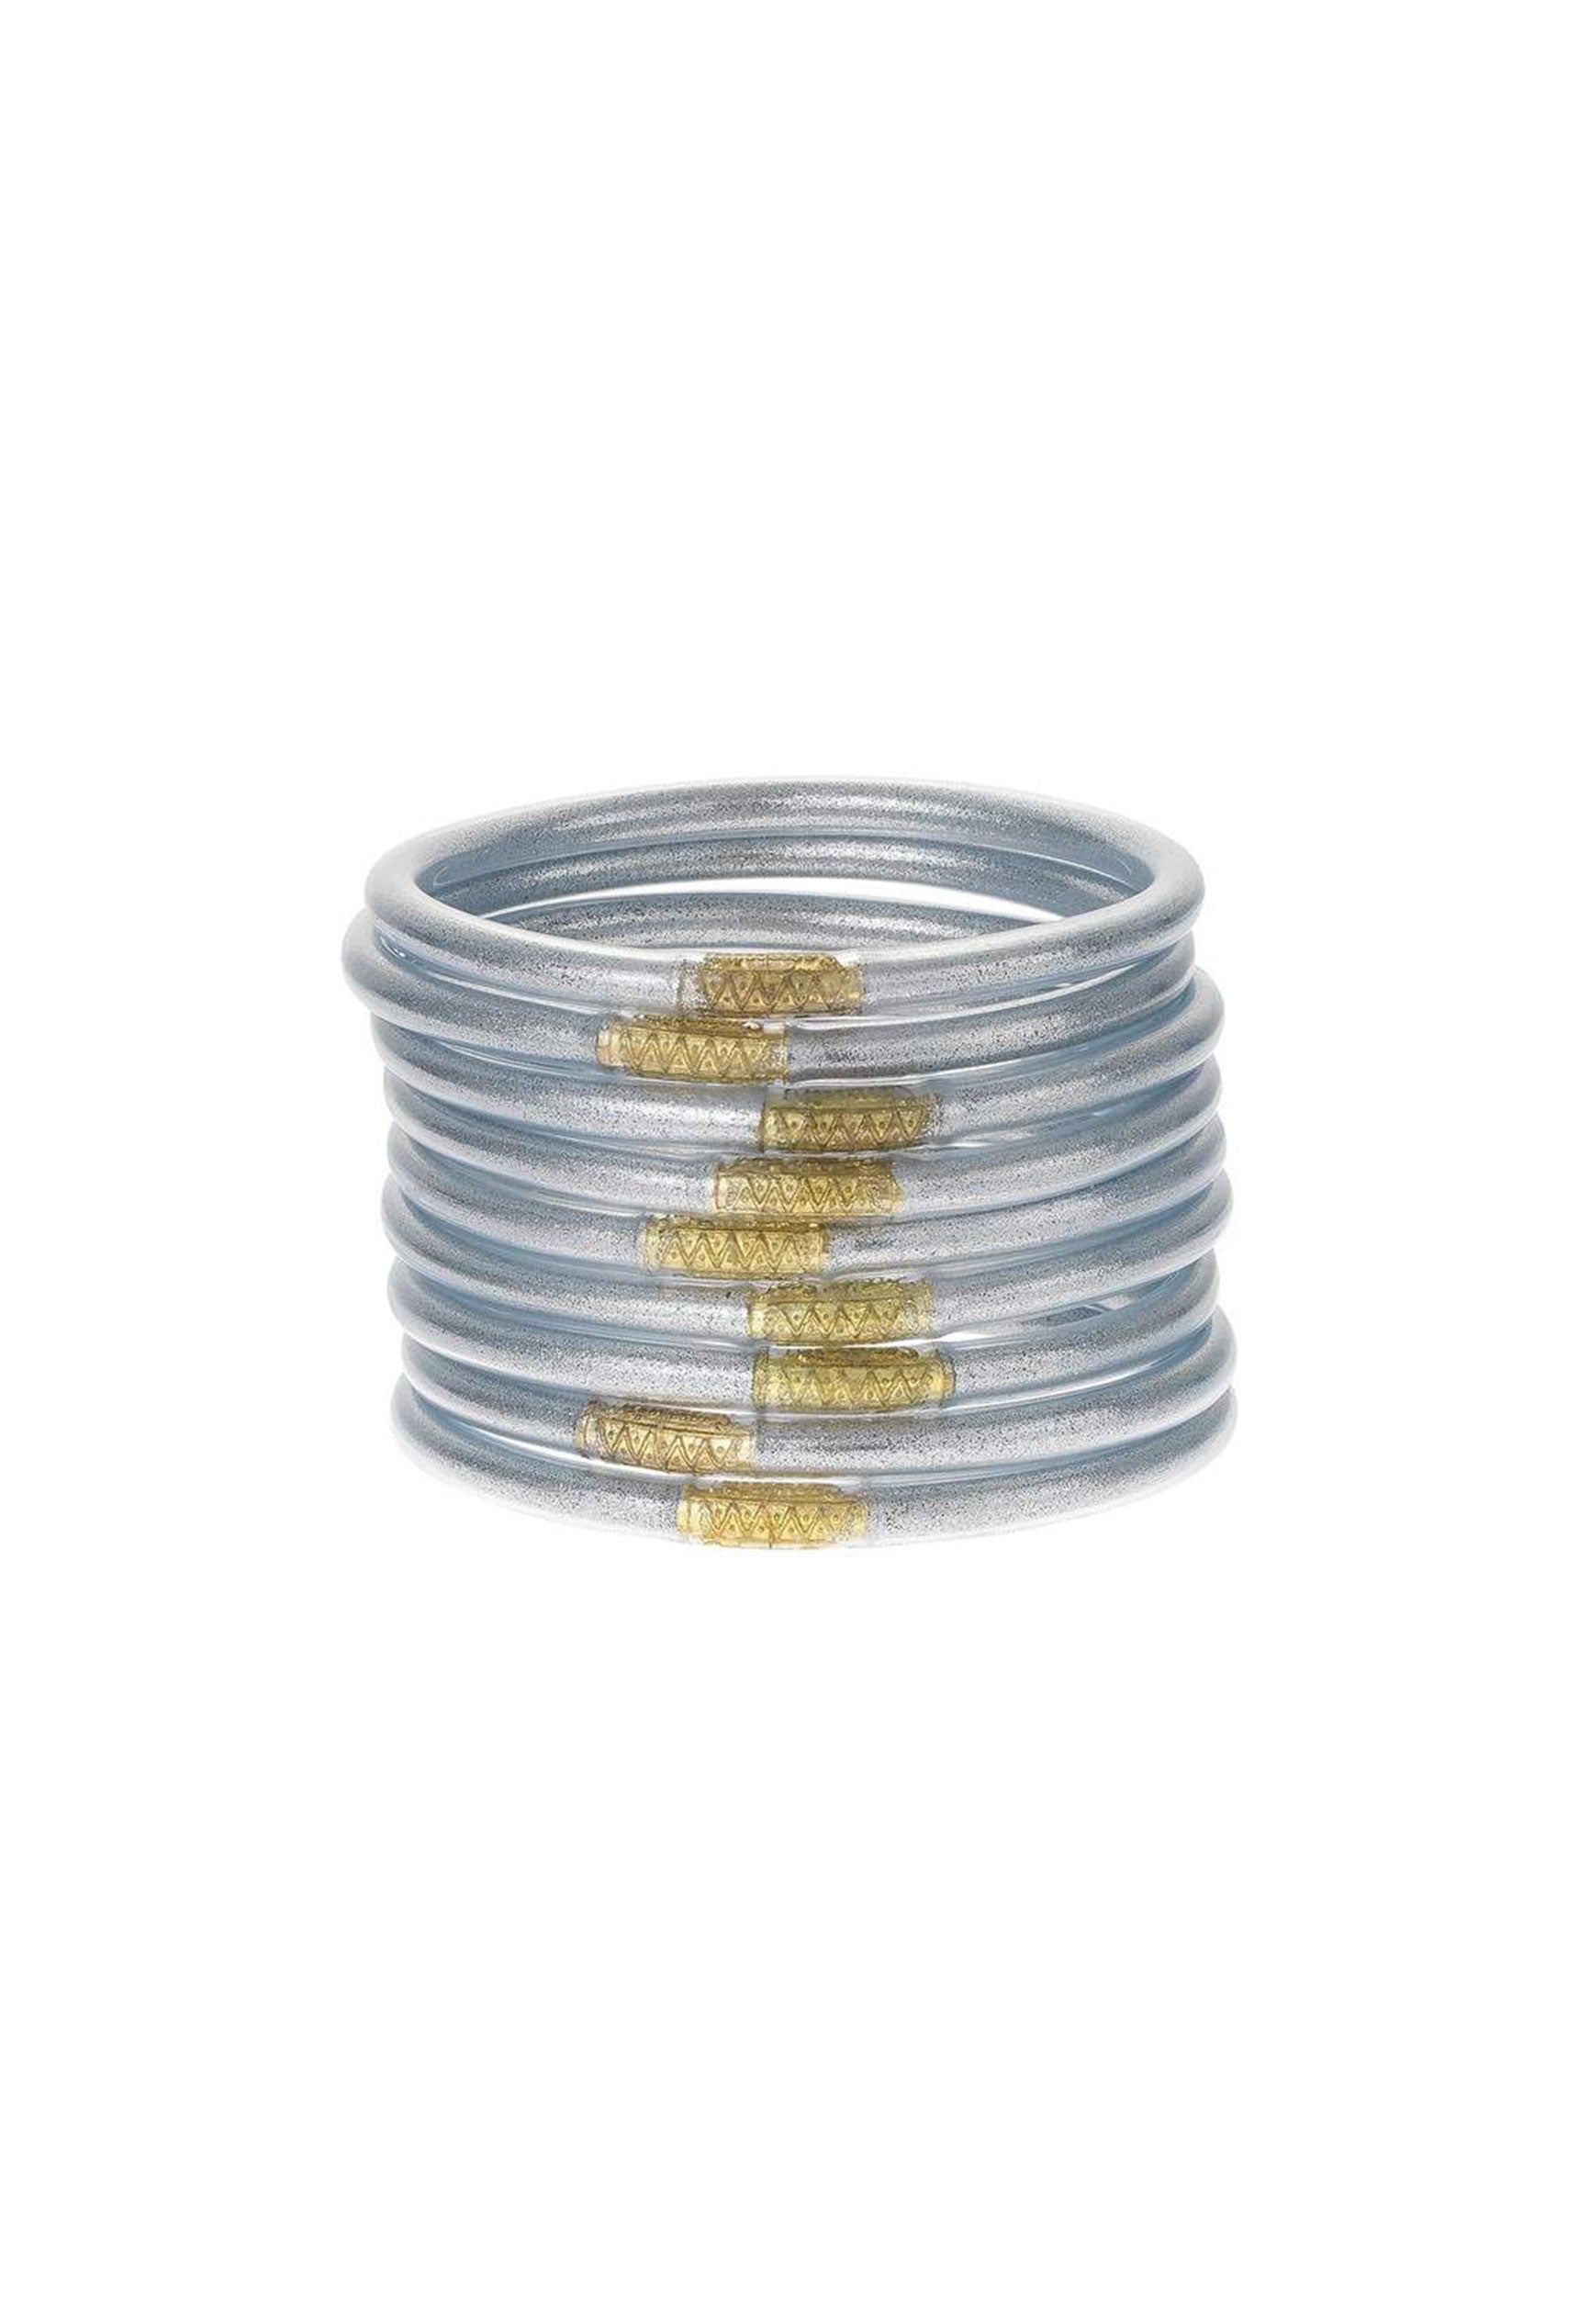 Silver Budhagirl Bangles in a Set of 9